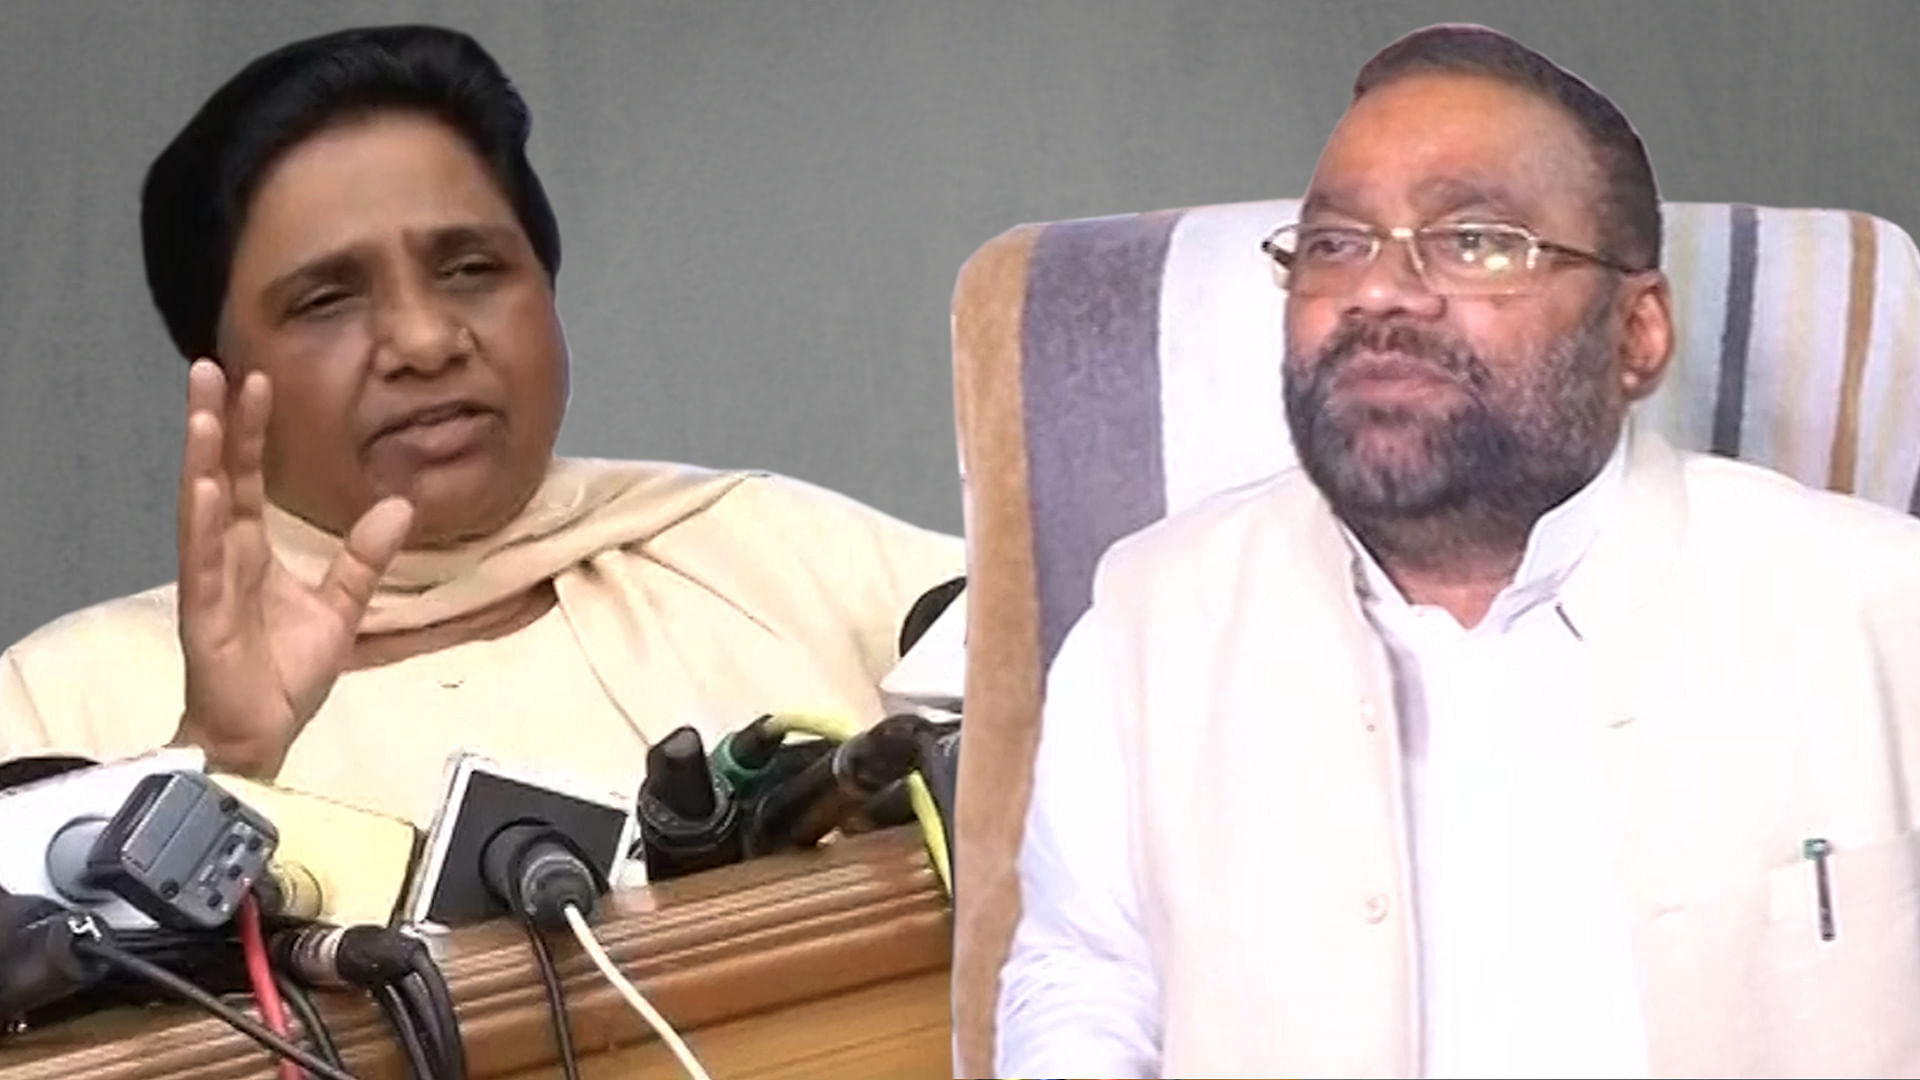 BSP supremo Mayawati (left) on Saturday launched a scathing attack on former BSP leader Swami Prasad Maurya (right). (Photo: altered by The Quint)